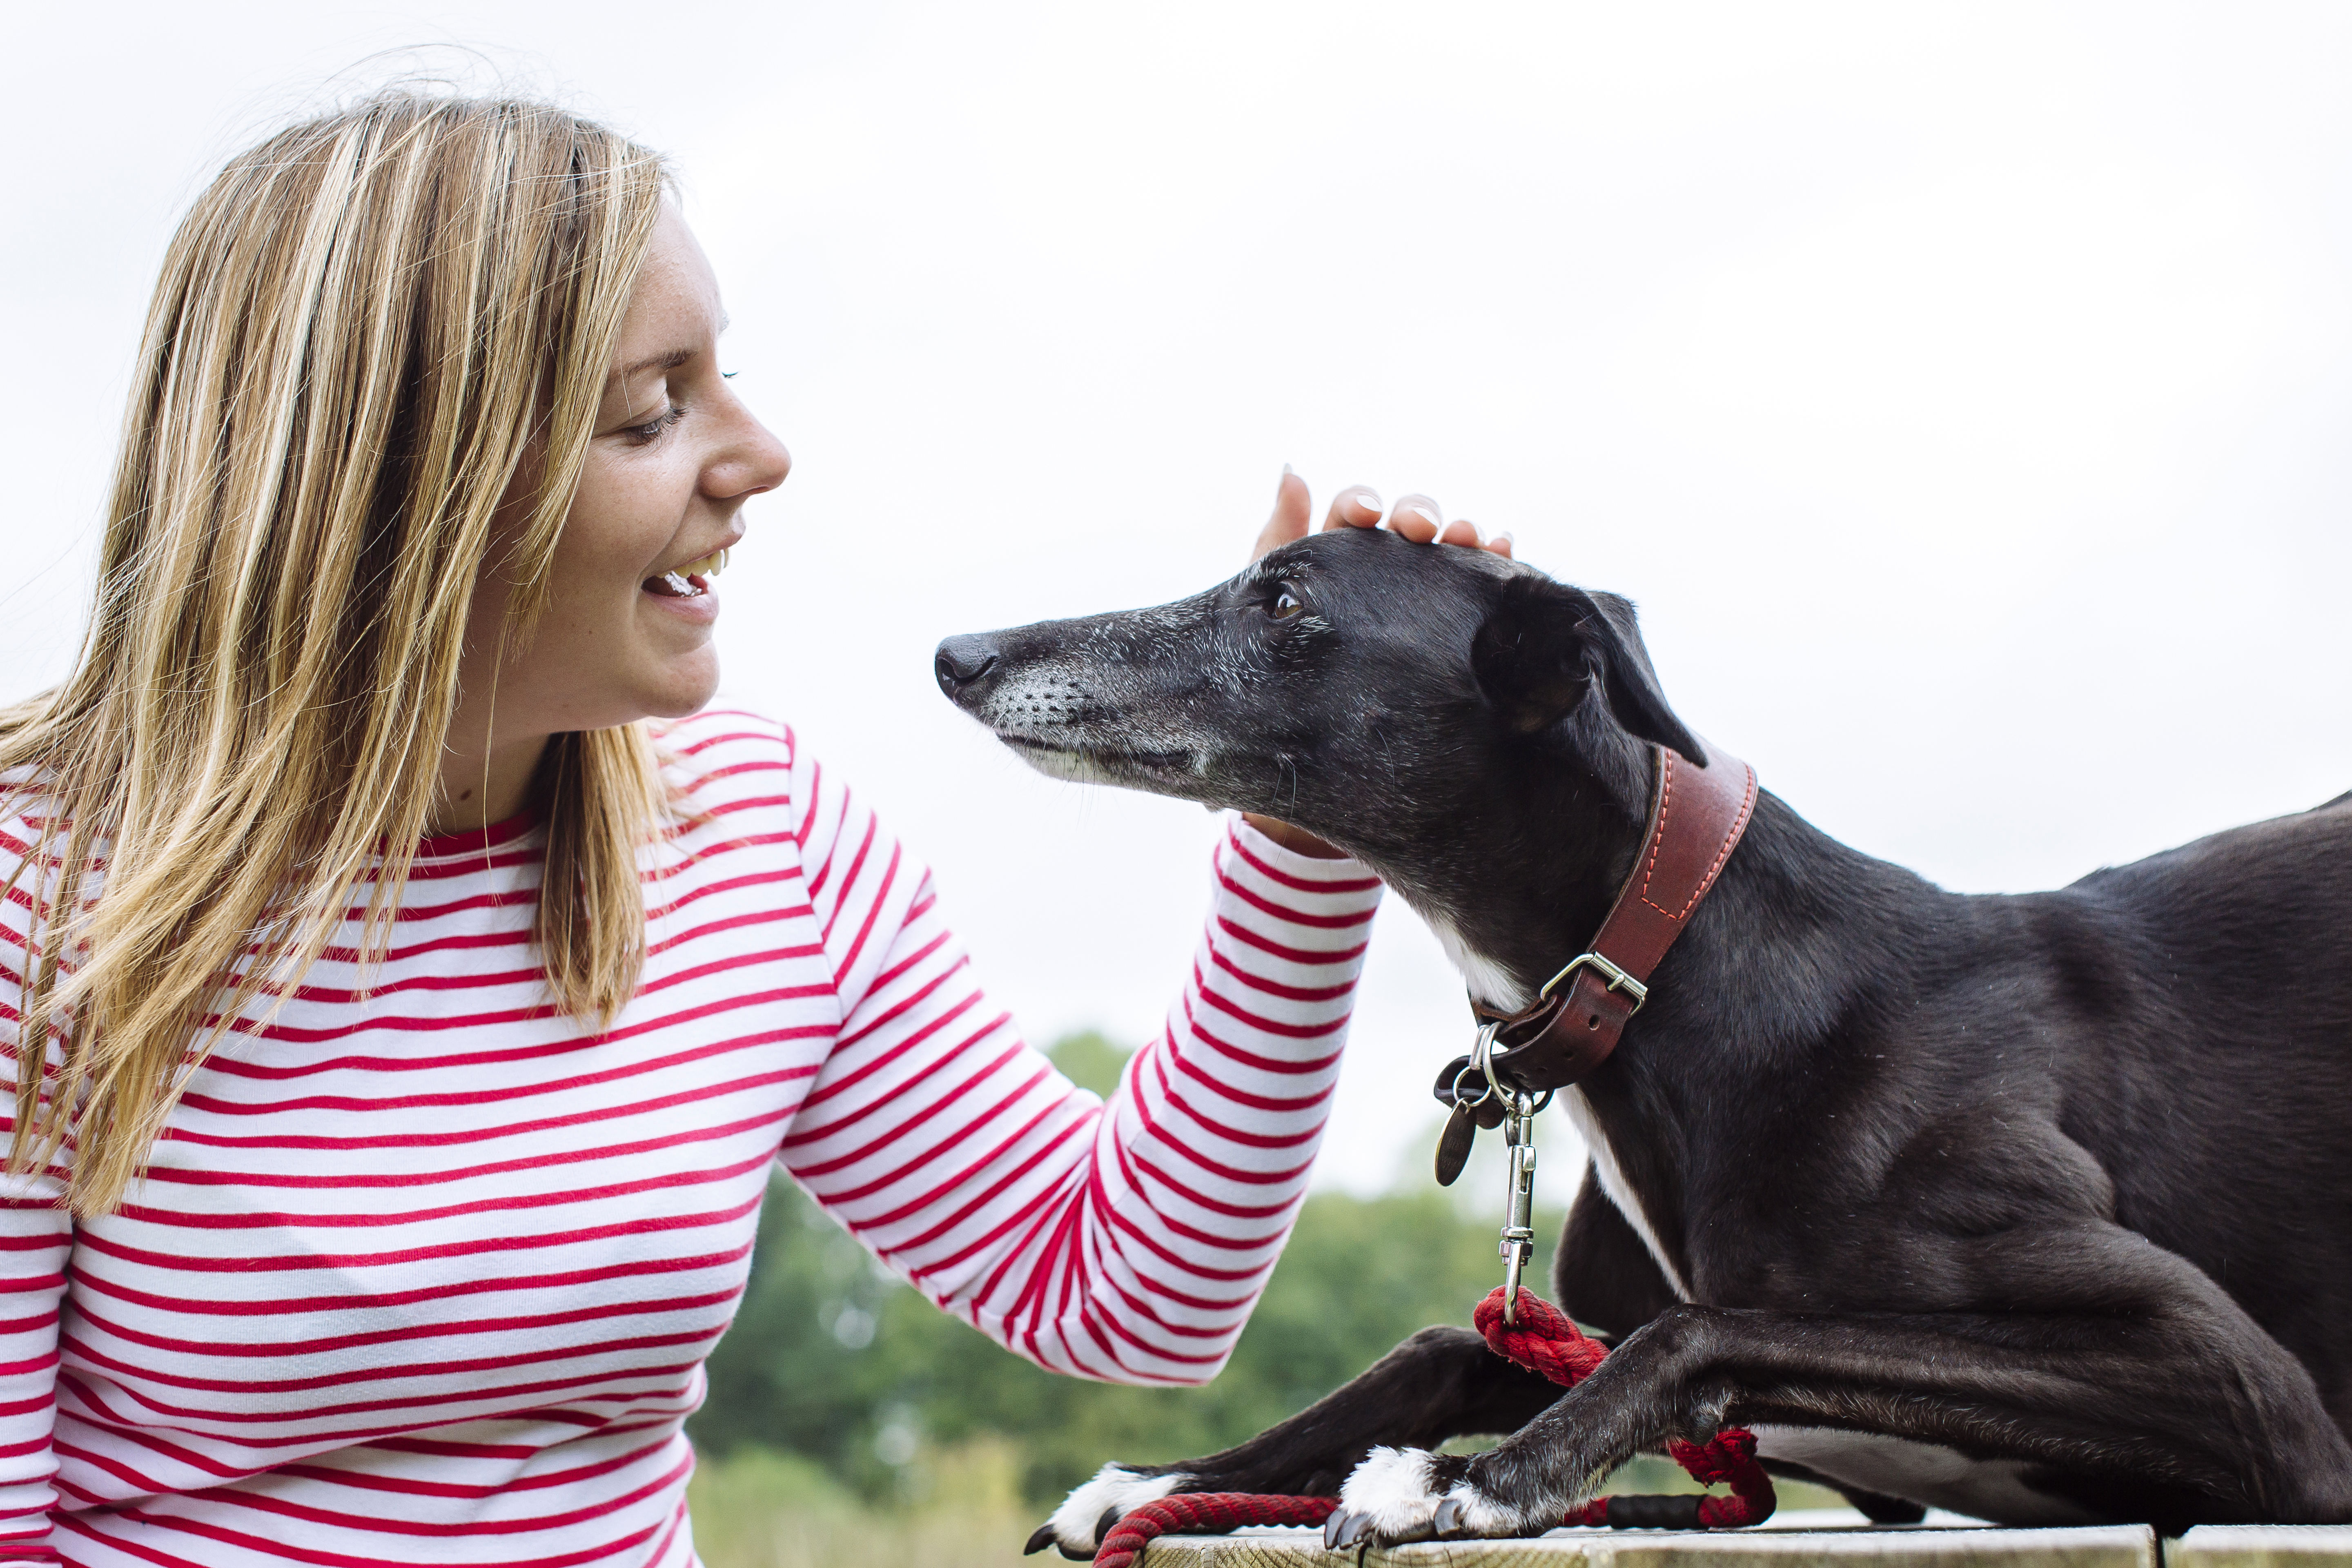 Lurcher Pip smiles at owner Stacey, who smiles back